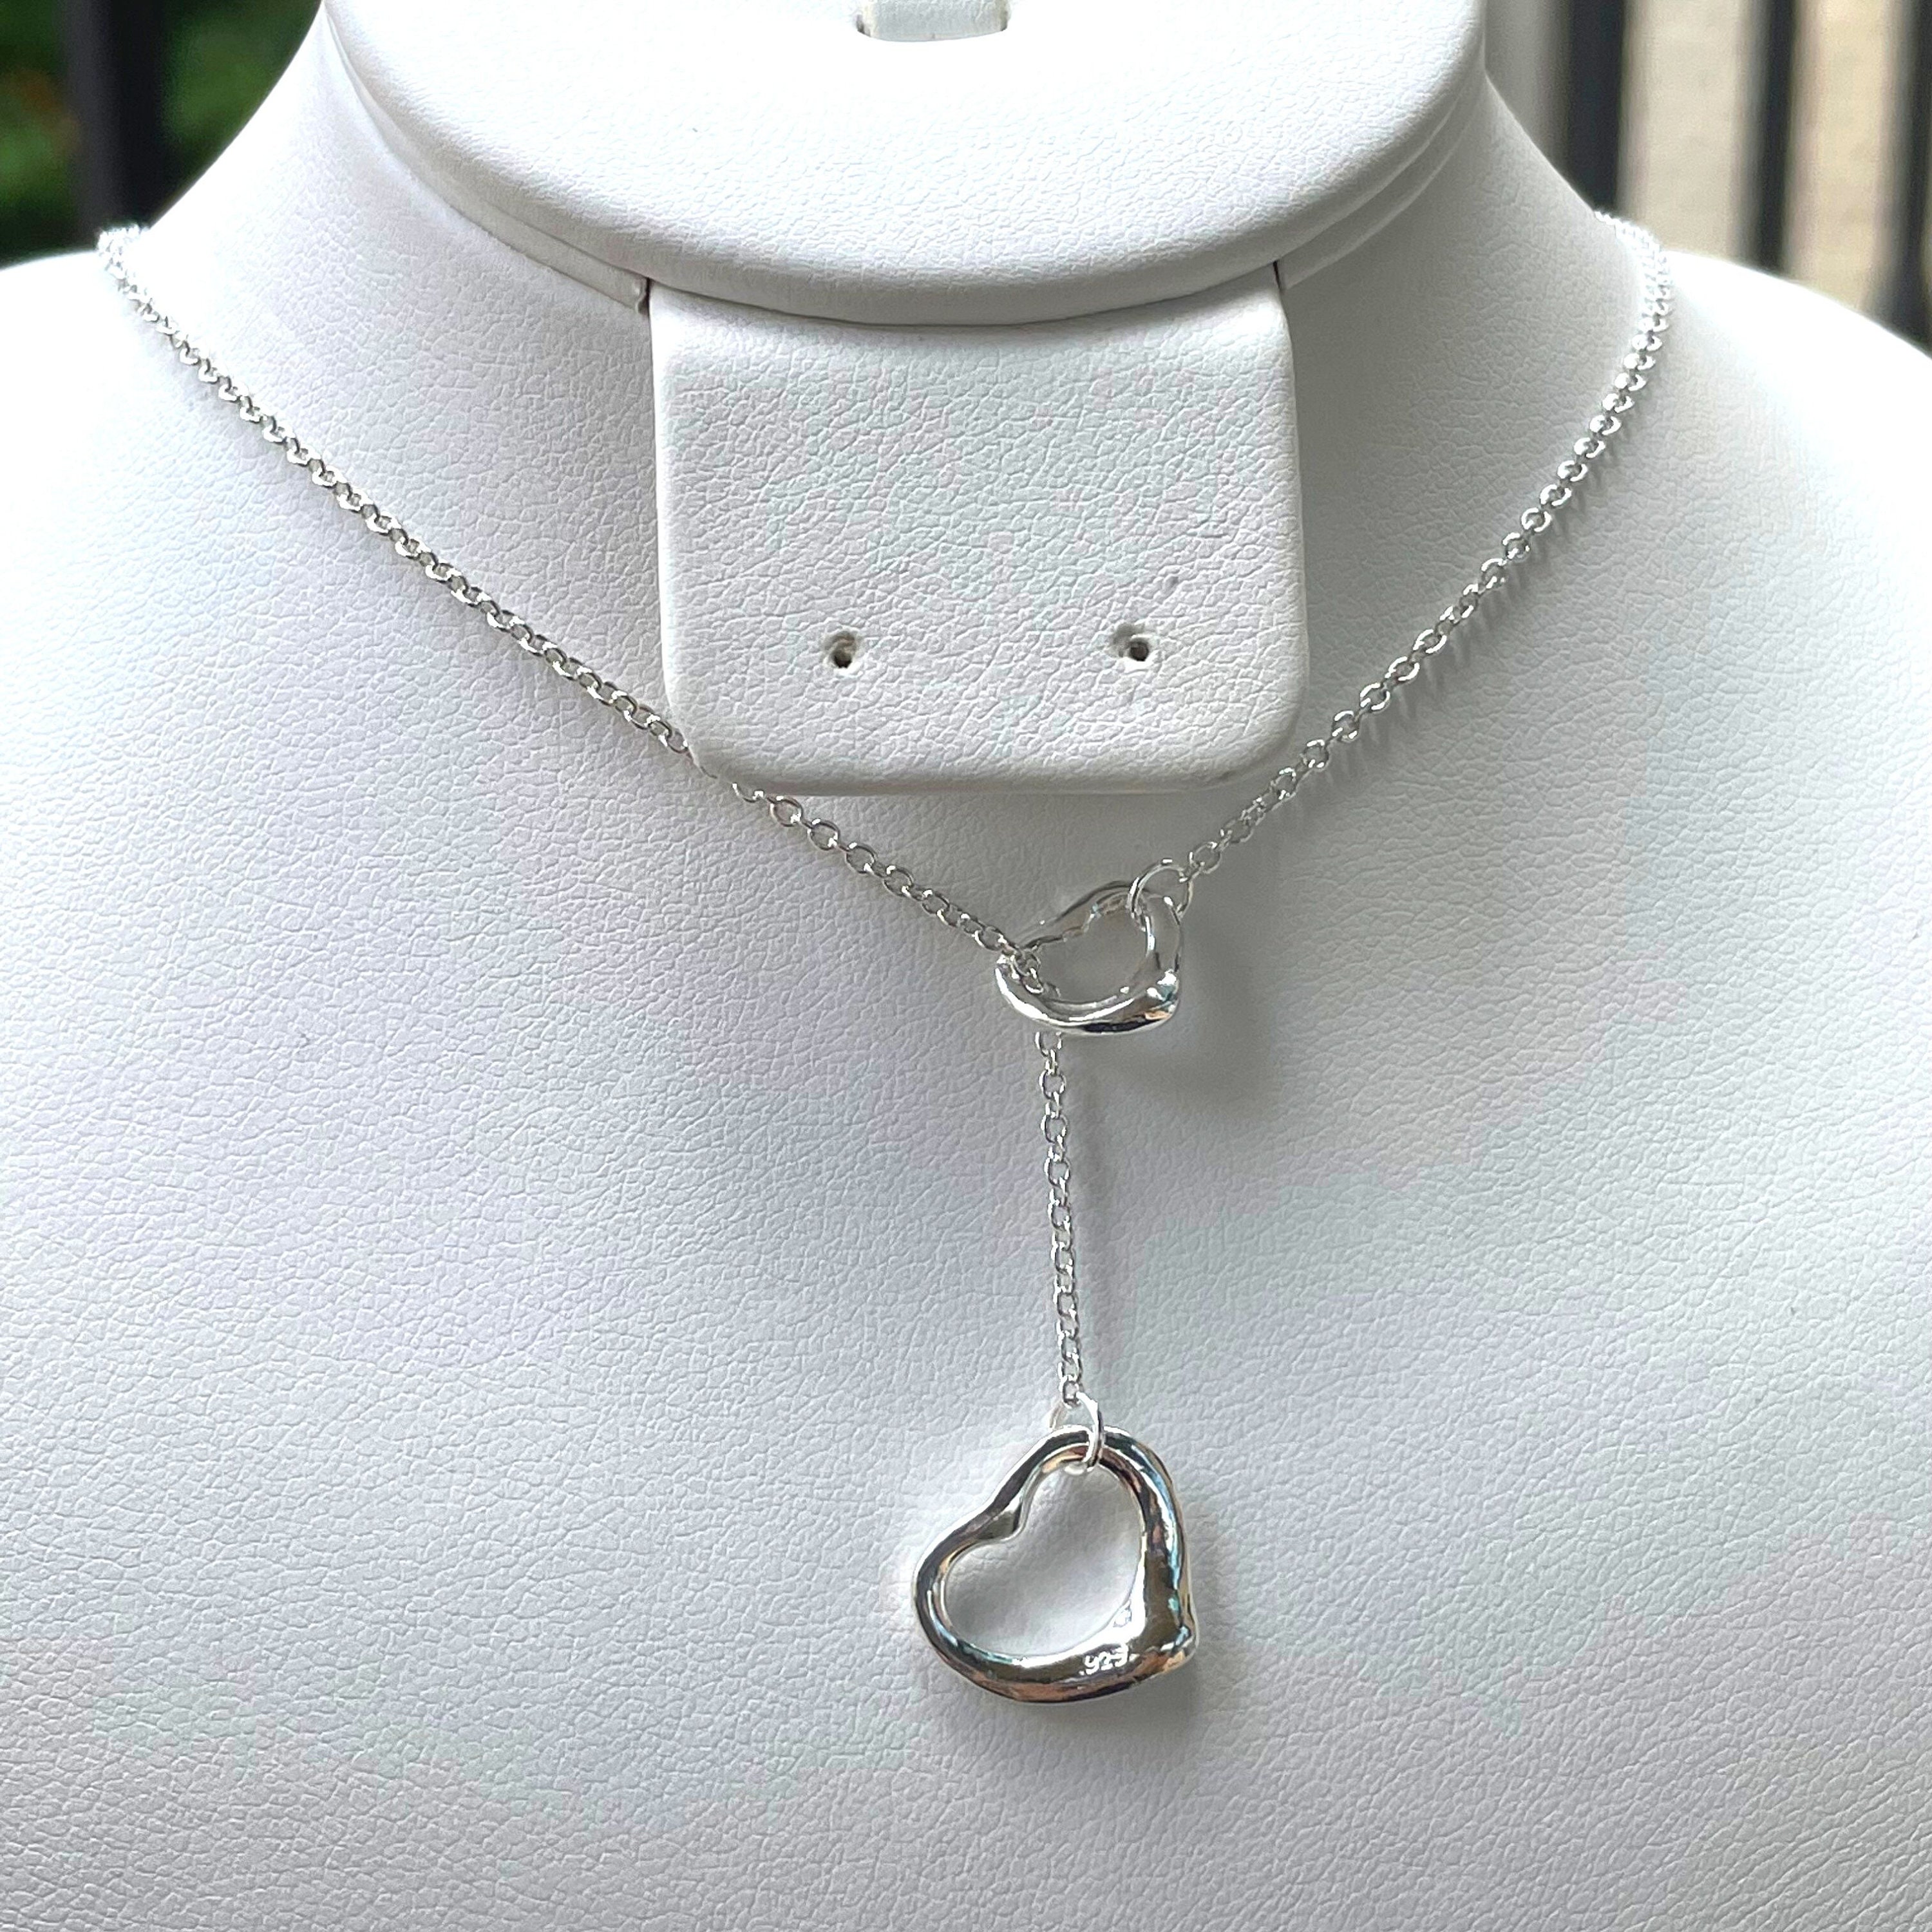 Heart Lariat Necklace Sterling Silver Necklace Heart Drop | Etsy